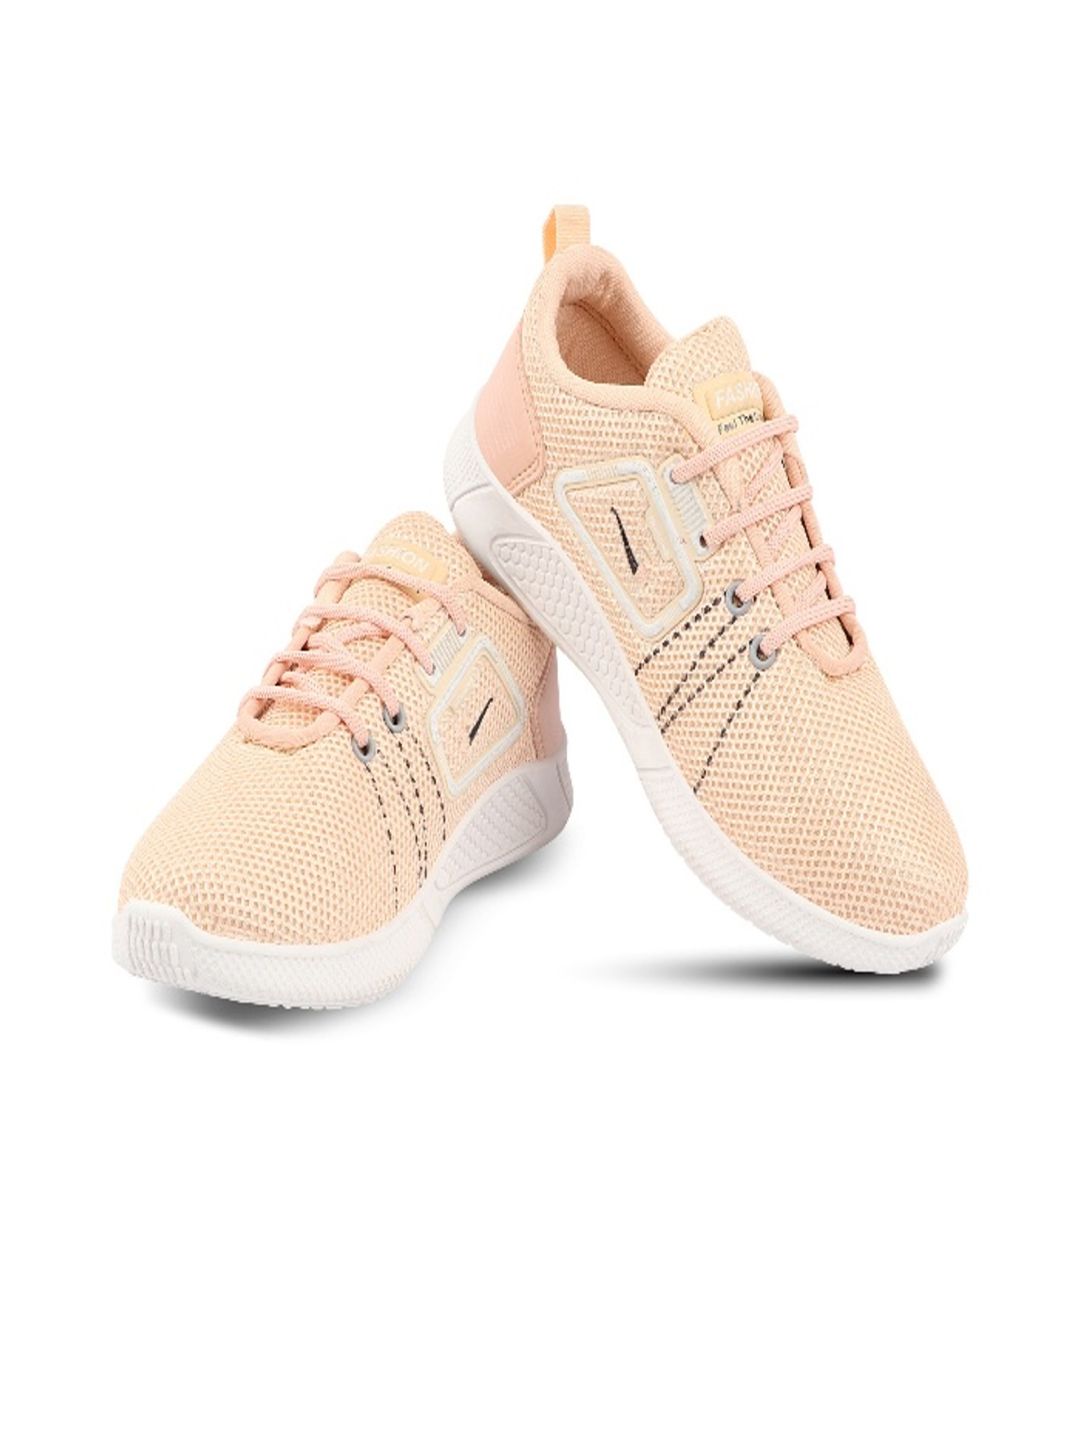 BEONZA Women Peach-Coloured Mesh Walking Non-Marking Shoes Price in India